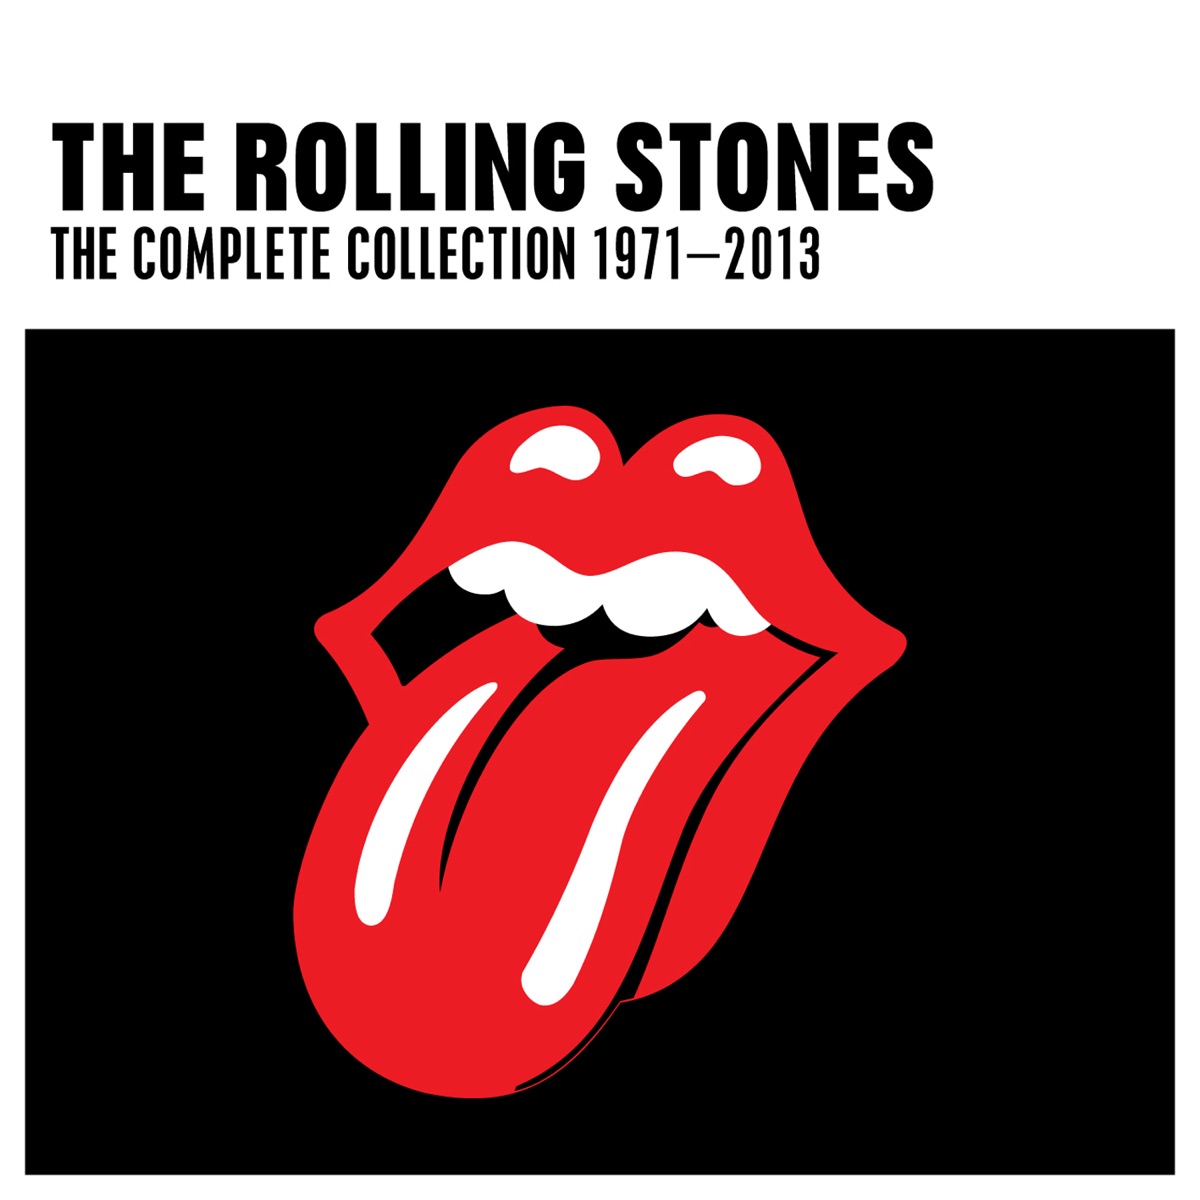 The Complete Collection 1971 2013 Album Cover By The Rolling Stones